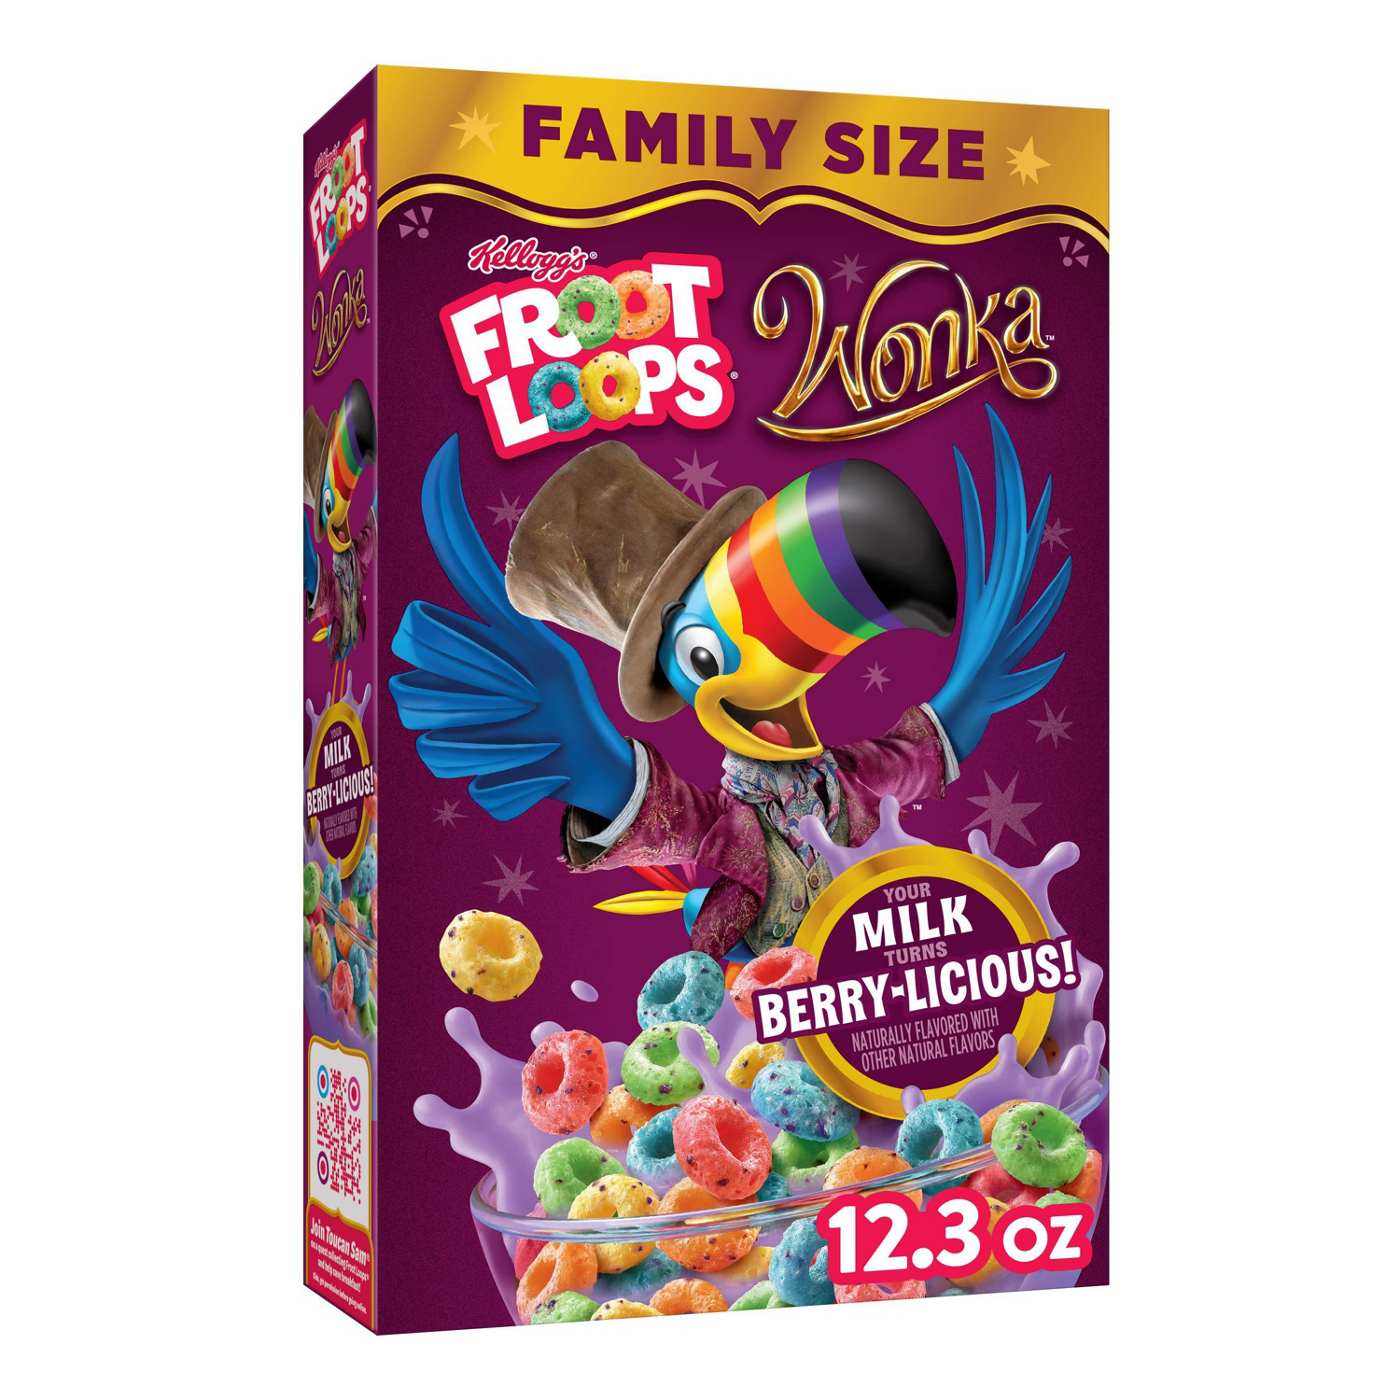 Kellogg's Froot Loops Willy Wonka Berry-licious Family Size - Shop ...